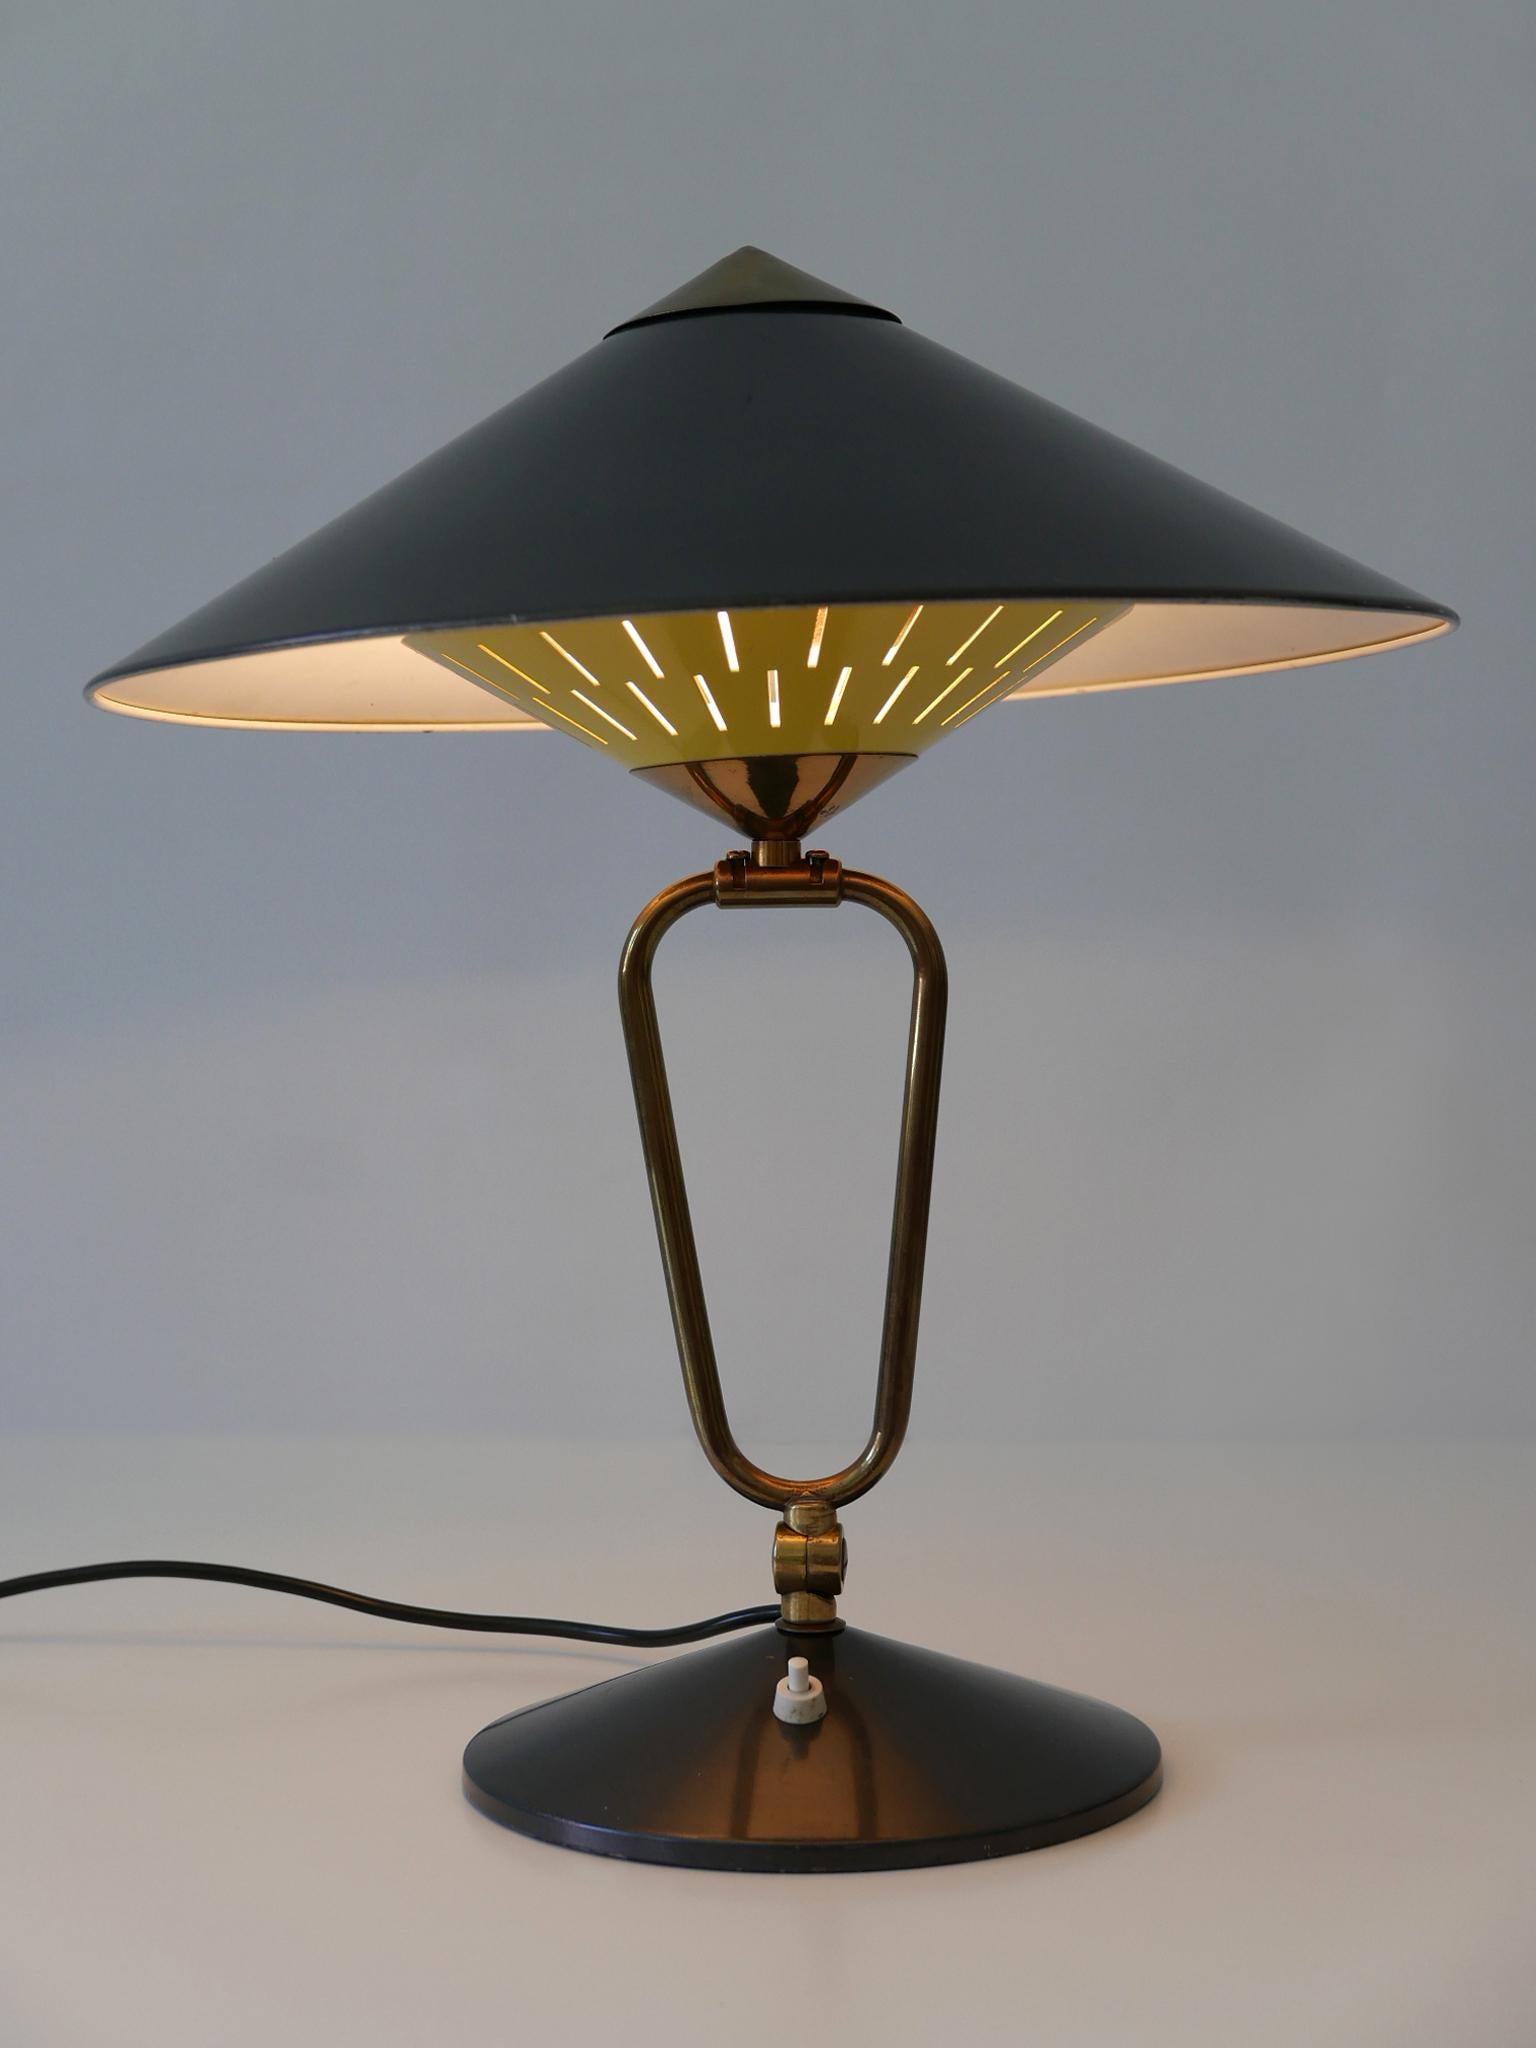 Exceptional, articulated and large Mid-Century Modern table lamp or wall sconce. Designed and manufactured in 1950s, Germany. 
The lamp can be used as table lamp as well as wall sconce. It is adjustable in various ways.

Executed in brass and